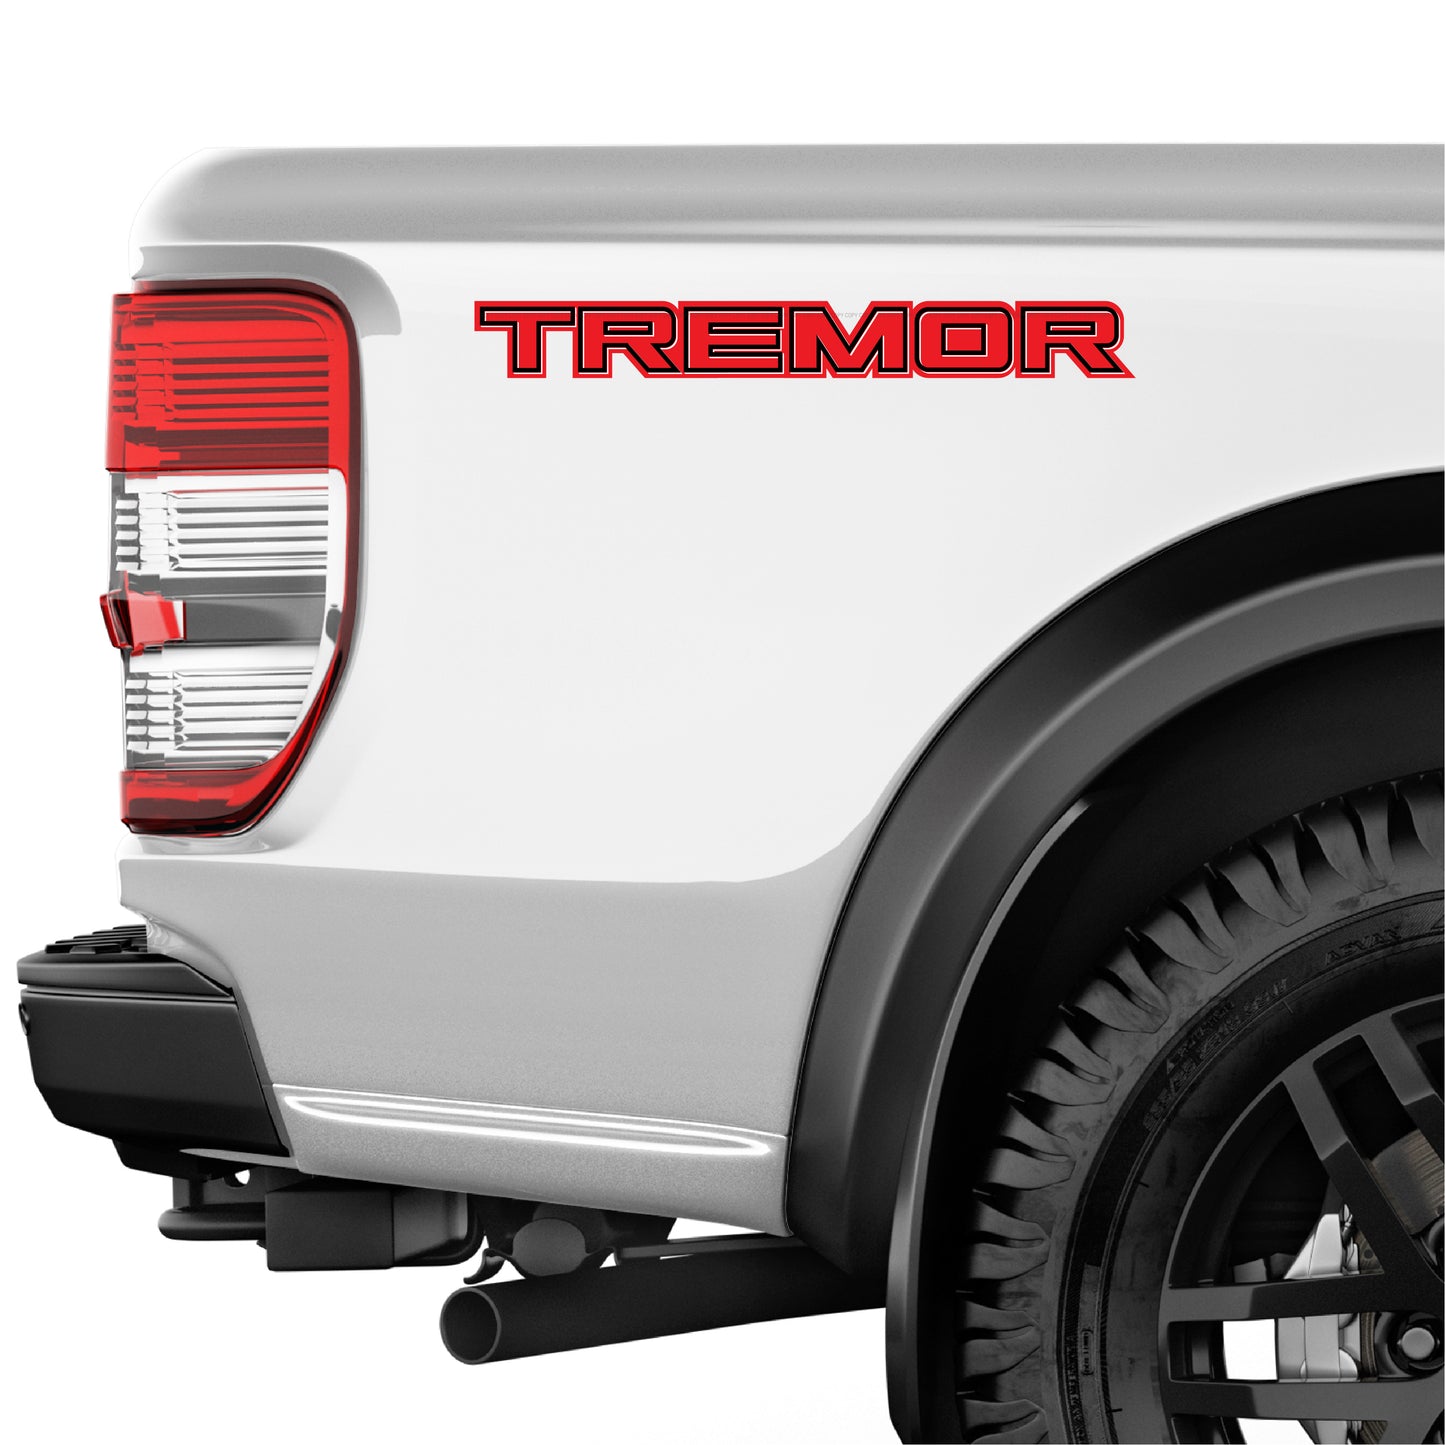 Tremor Red Decals Package White Accent Truck Bed Side Sticker